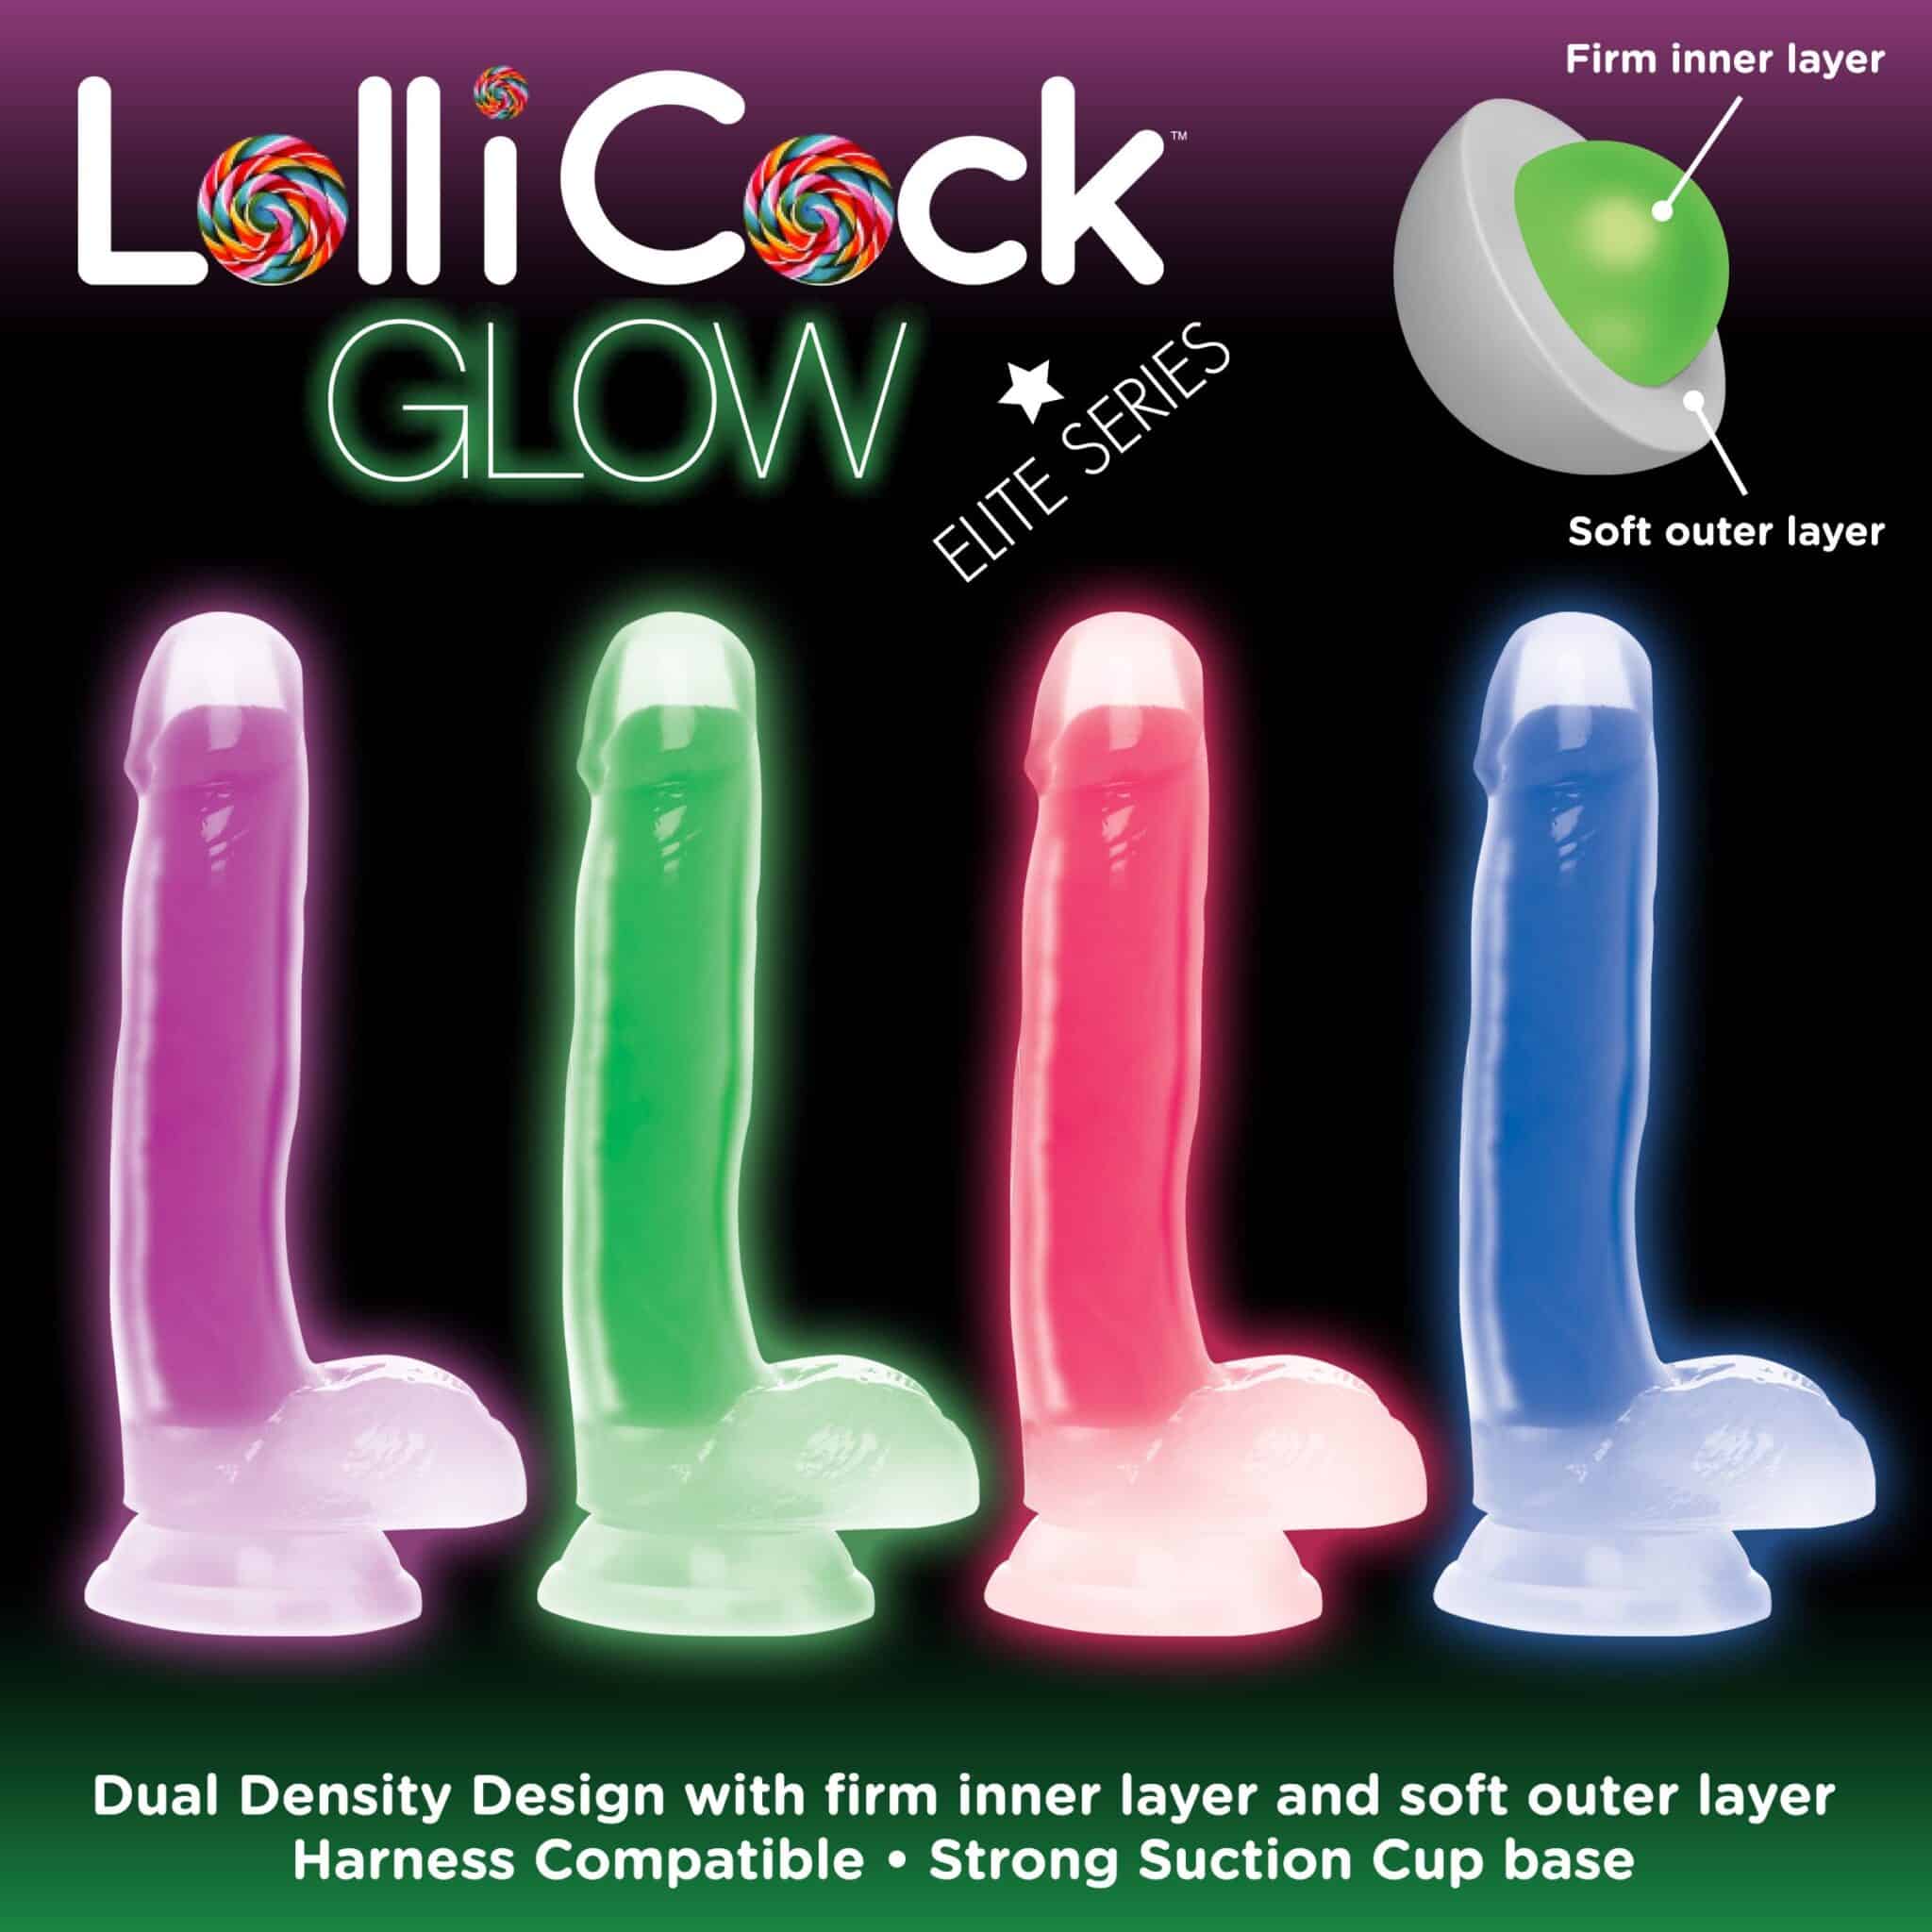 7 Inch Glow-in-the-Dark Silicone Dildo with Balls – Blue